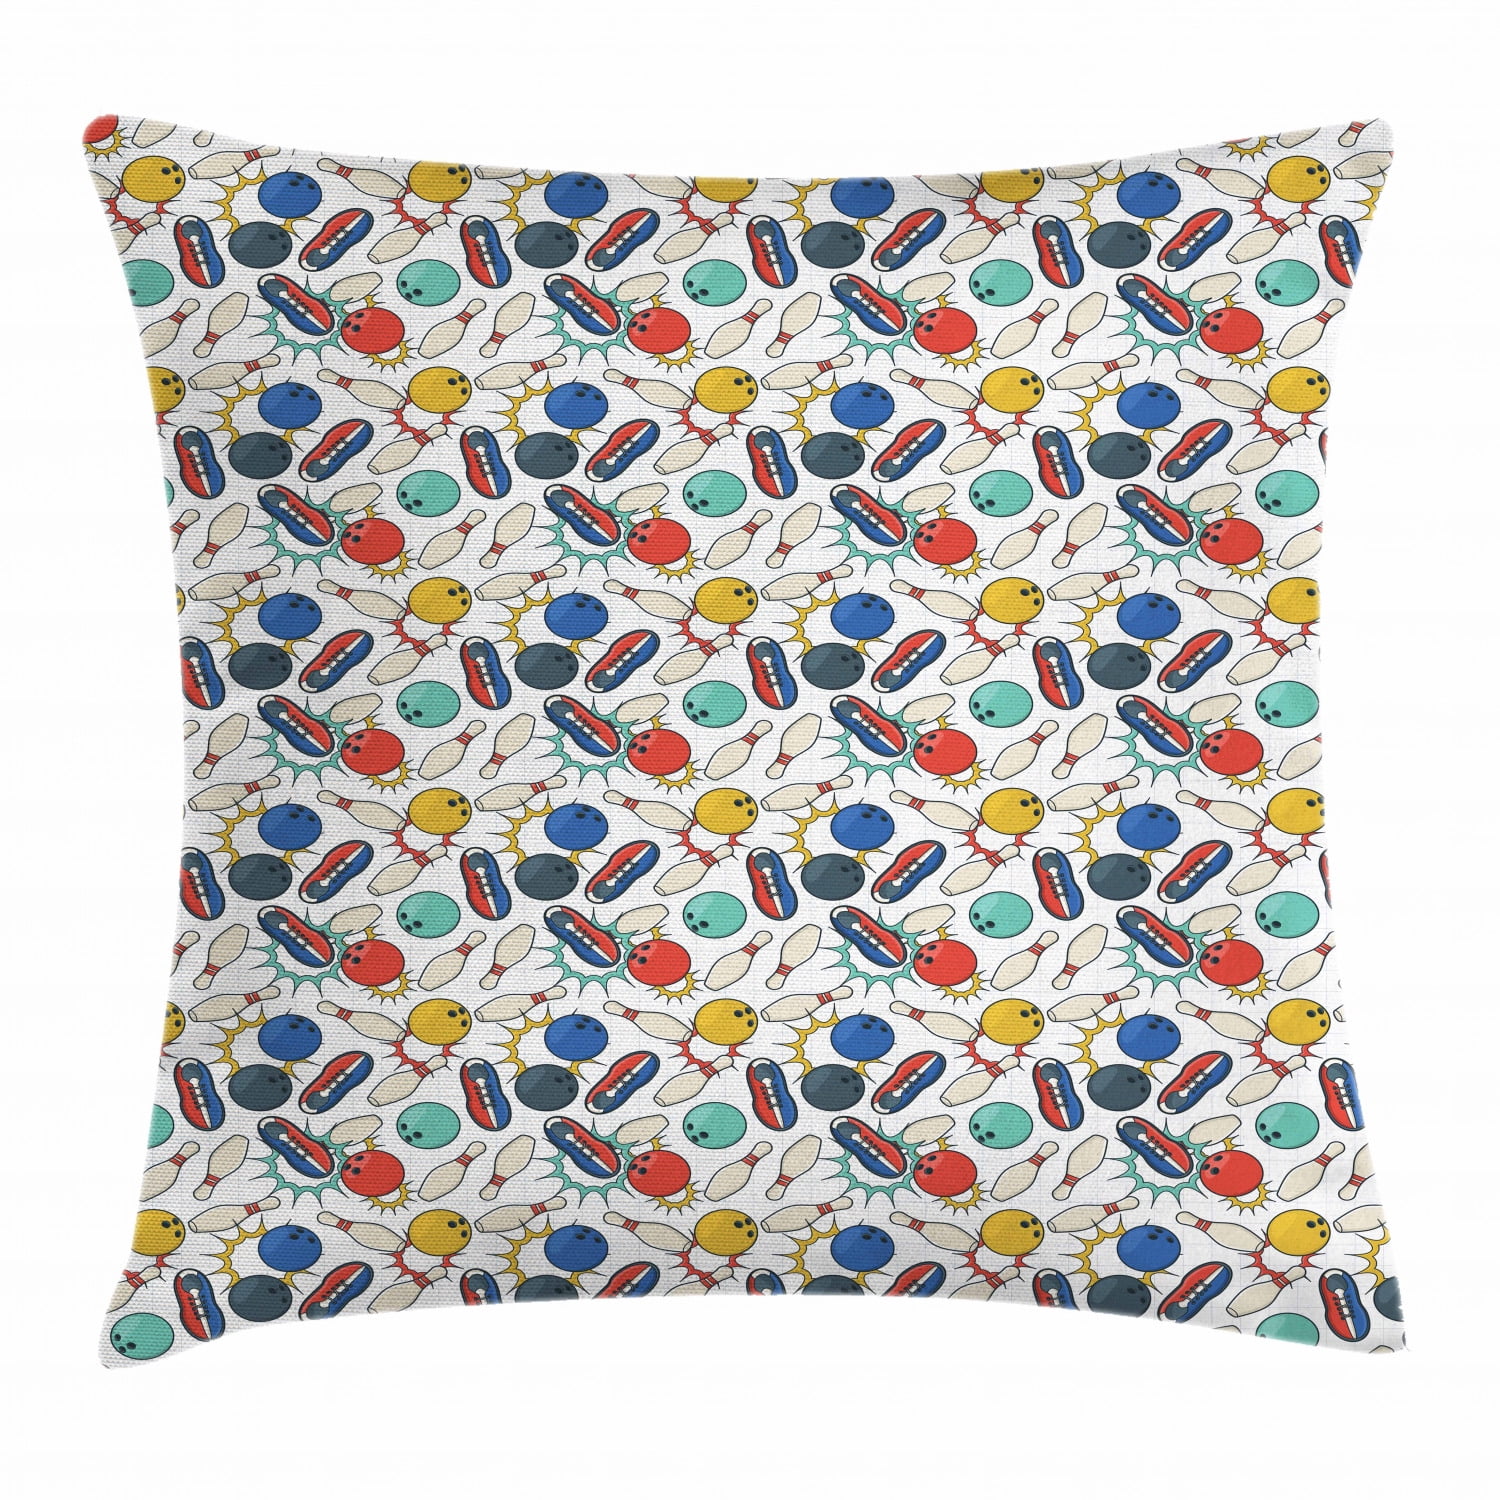 I Love Bowling Throw Pillow 18x18 Multicolor